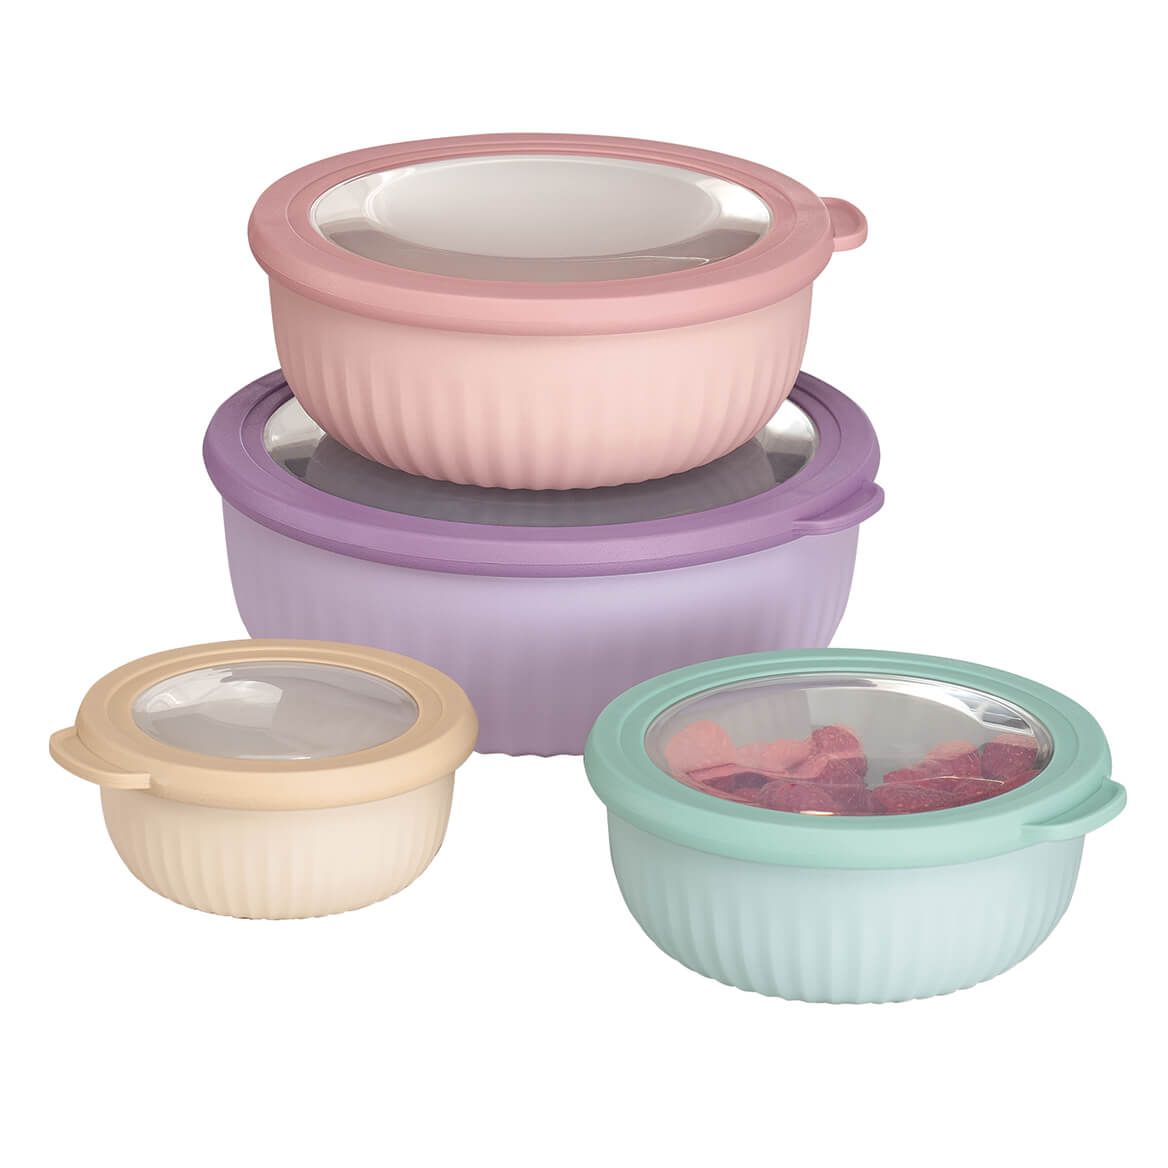 Cap Tight Deluxe Storage Containers, Set of 4 + '-' + 369400